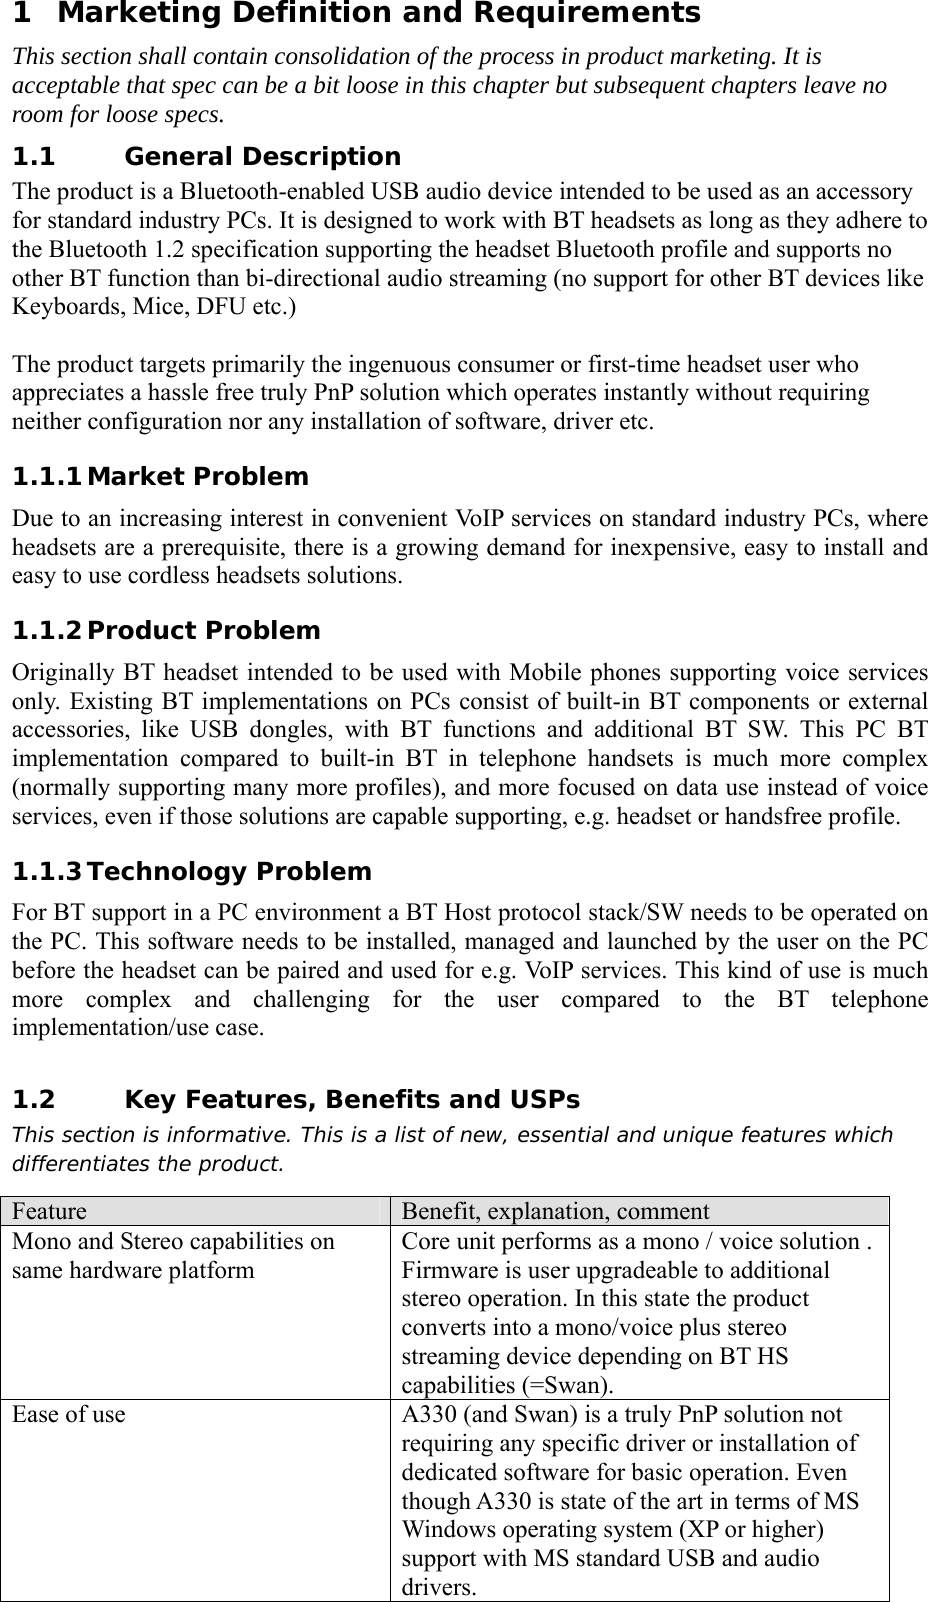 1 Marketing Definition and Requirements This section shall contain consolidation of the process in product marketing. It is acceptable that spec can be a bit loose in this chapter but subsequent chapters leave no room for loose specs. 1.1 General Description The product is a Bluetooth-enabled USB audio device intended to be used as an accessory for standard industry PCs. It is designed to work with BT headsets as long as they adhere to the Bluetooth 1.2 specification supporting the headset Bluetooth profile and supports no other BT function than bi-directional audio streaming (no support for other BT devices like Keyboards, Mice, DFU etc.)  The product targets primarily the ingenuous consumer or first-time headset user who appreciates a hassle free truly PnP solution which operates instantly without requiring neither configuration nor any installation of software, driver etc.   1.1.1 Market Problem Due to an increasing interest in convenient VoIP services on standard industry PCs, where headsets are a prerequisite, there is a growing demand for inexpensive, easy to install and easy to use cordless headsets solutions. 1.1.2 Product Problem Originally BT headset intended to be used with Mobile phones supporting voice services only. Existing BT implementations on PCs consist of built-in BT components or external accessories, like USB dongles, with BT functions and additional BT SW. This PC BT implementation compared to built-in BT in telephone handsets is much more complex (normally supporting many more profiles), and more focused on data use instead of voice services, even if those solutions are capable supporting, e.g. headset or handsfree profile. 1.1.3 Technology Problem For BT support in a PC environment a BT Host protocol stack/SW needs to be operated on the PC. This software needs to be installed, managed and launched by the user on the PC before the headset can be paired and used for e.g. VoIP services. This kind of use is much more complex and challenging for the user compared to the BT telephone implementation/use case.  1.2 Key Features, Benefits and USPs This section is informative. This is a list of new, essential and unique features which differentiates the product. Feature  Benefit, explanation, comment Mono and Stereo capabilities on same hardware platform Core unit performs as a mono / voice solution .   Firmware is user upgradeable to additional stereo operation. In this state the product converts into a mono/voice plus stereo streaming device depending on BT HS capabilities (=Swan). Ease of use  A330 (and Swan) is a truly PnP solution not requiring any specific driver or installation of dedicated software for basic operation. Even though A330 is state of the art in terms of MS Windows operating system (XP or higher) support with MS standard USB and audio drivers. 